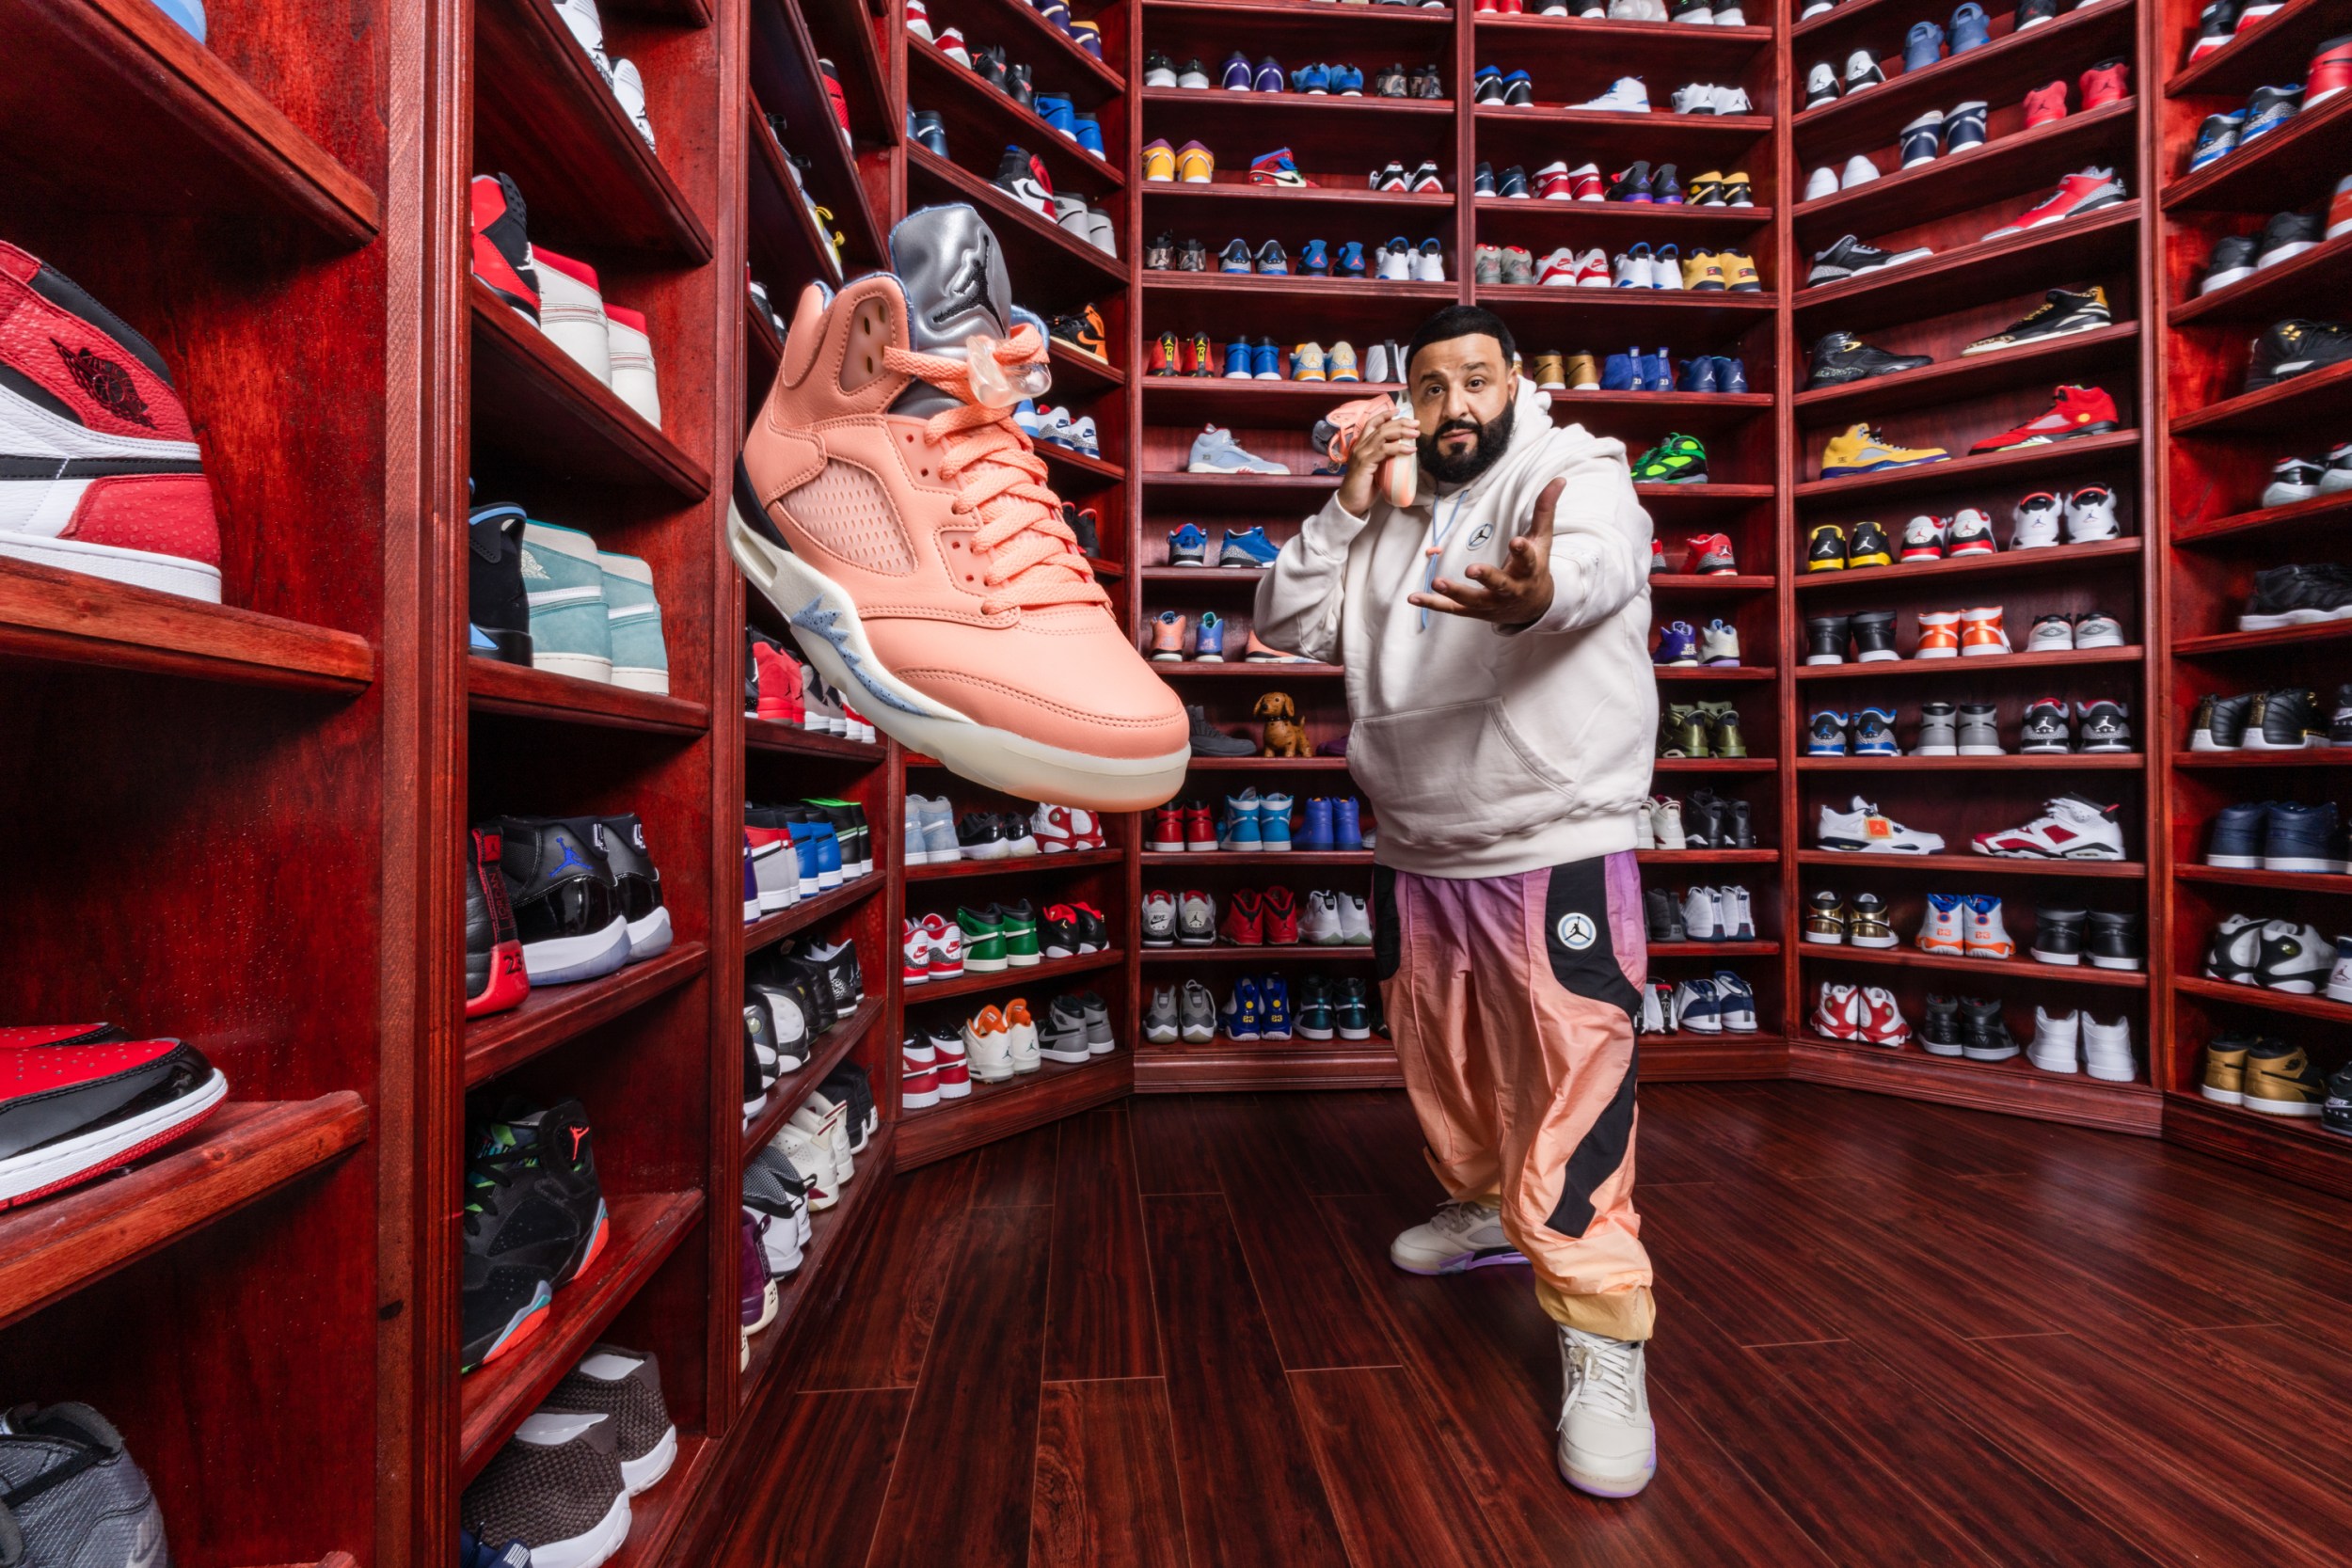 DJ Khaled stands in the center of a large shoe closet surrounded by shelves of bright colored sneakers. He holds a pink one up to his ear like a telephone, with another floating in the air as if he tossed it to the audience.